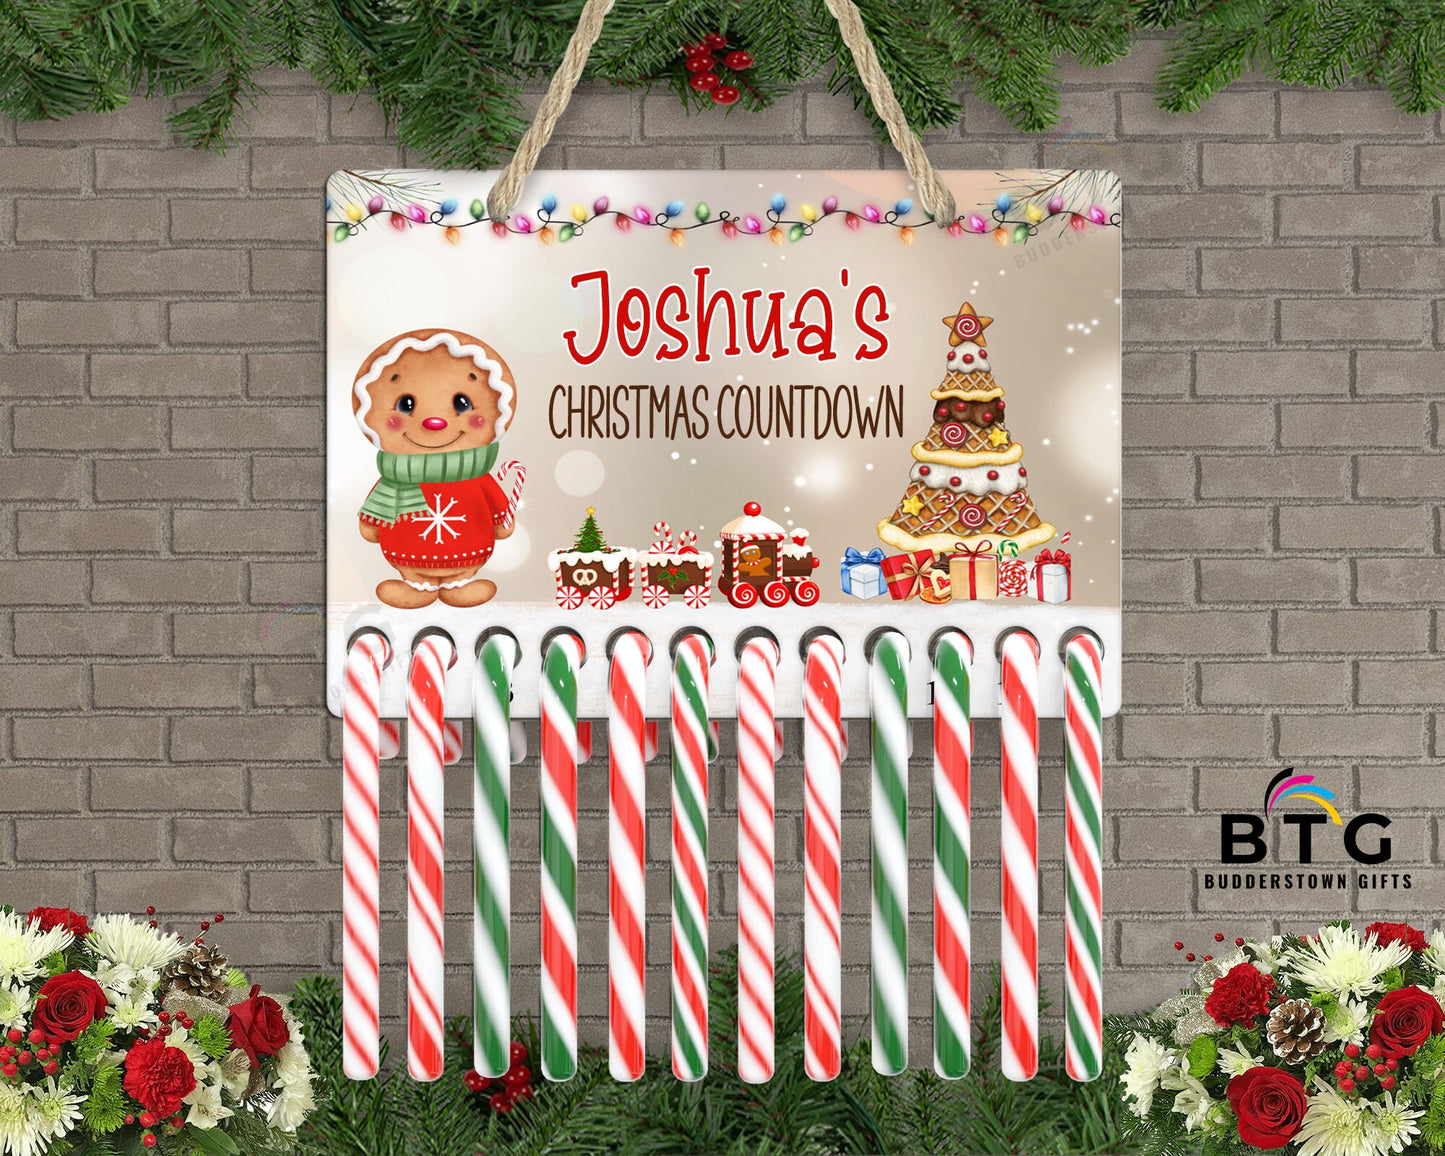 Candy Cane Christmas Countdown - 12 Days to Christmas - Gingerbread Boy - Kids Interactive